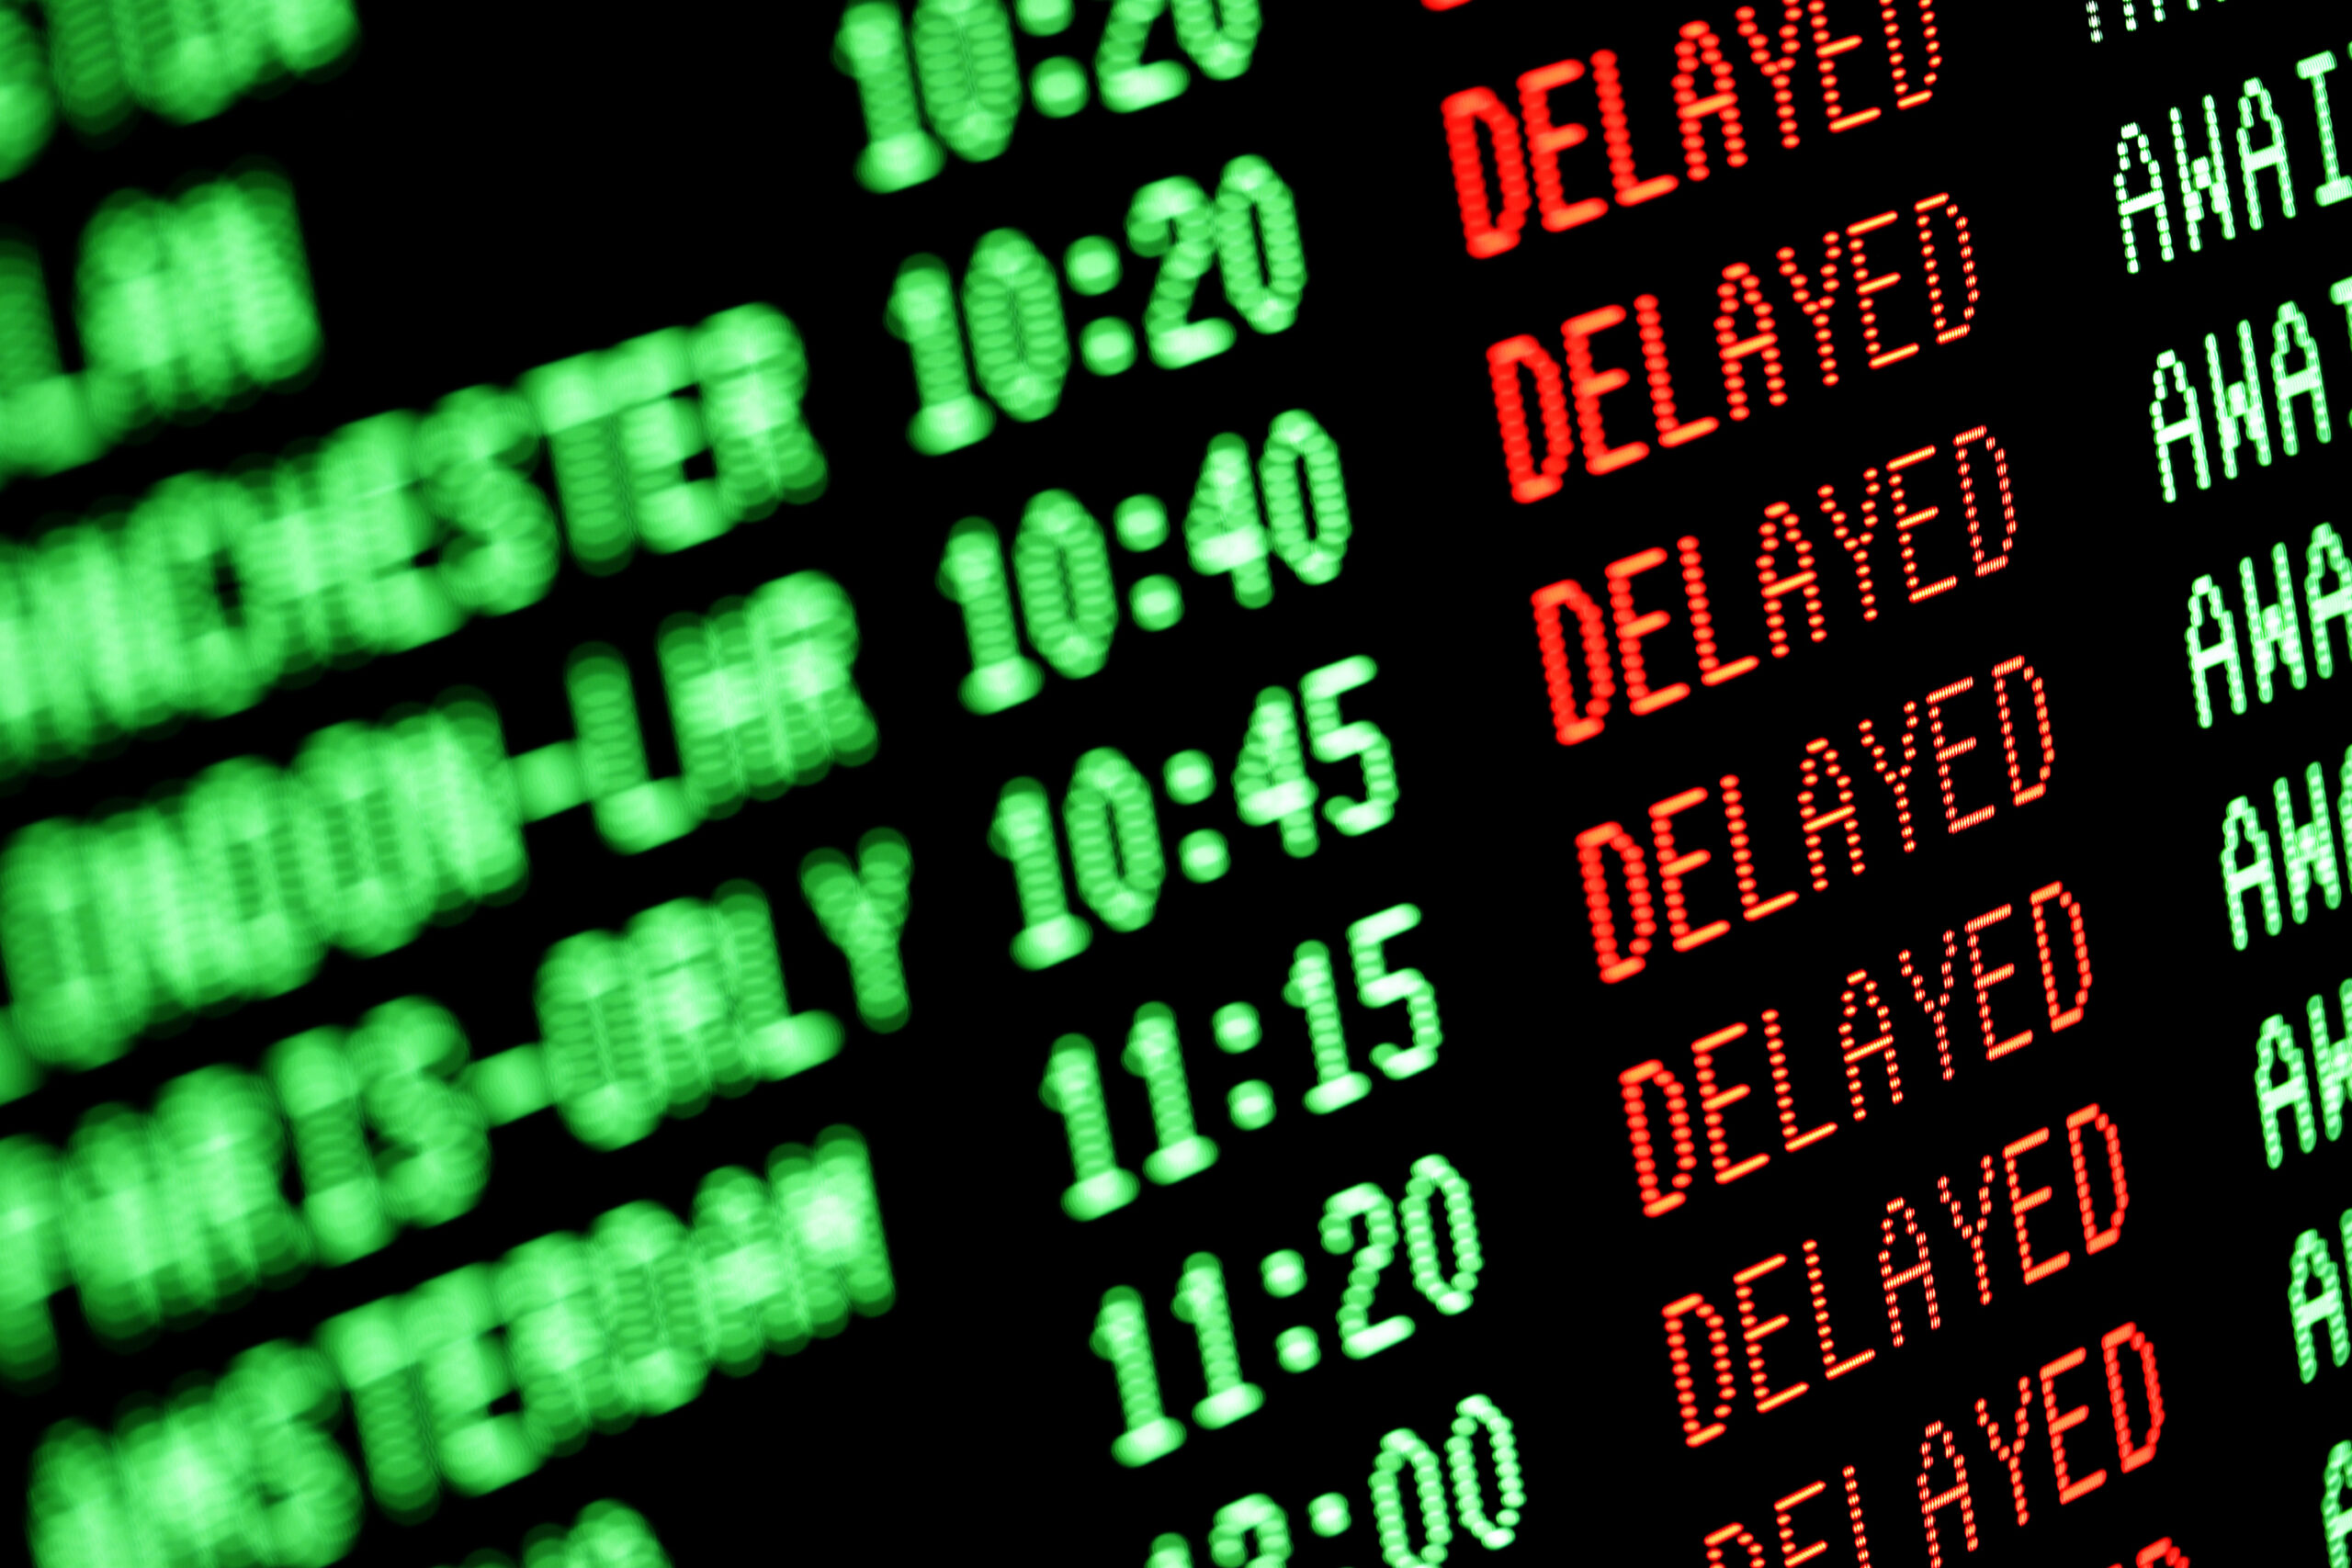 A stock image showing multiple flights being delayed on a schedule.